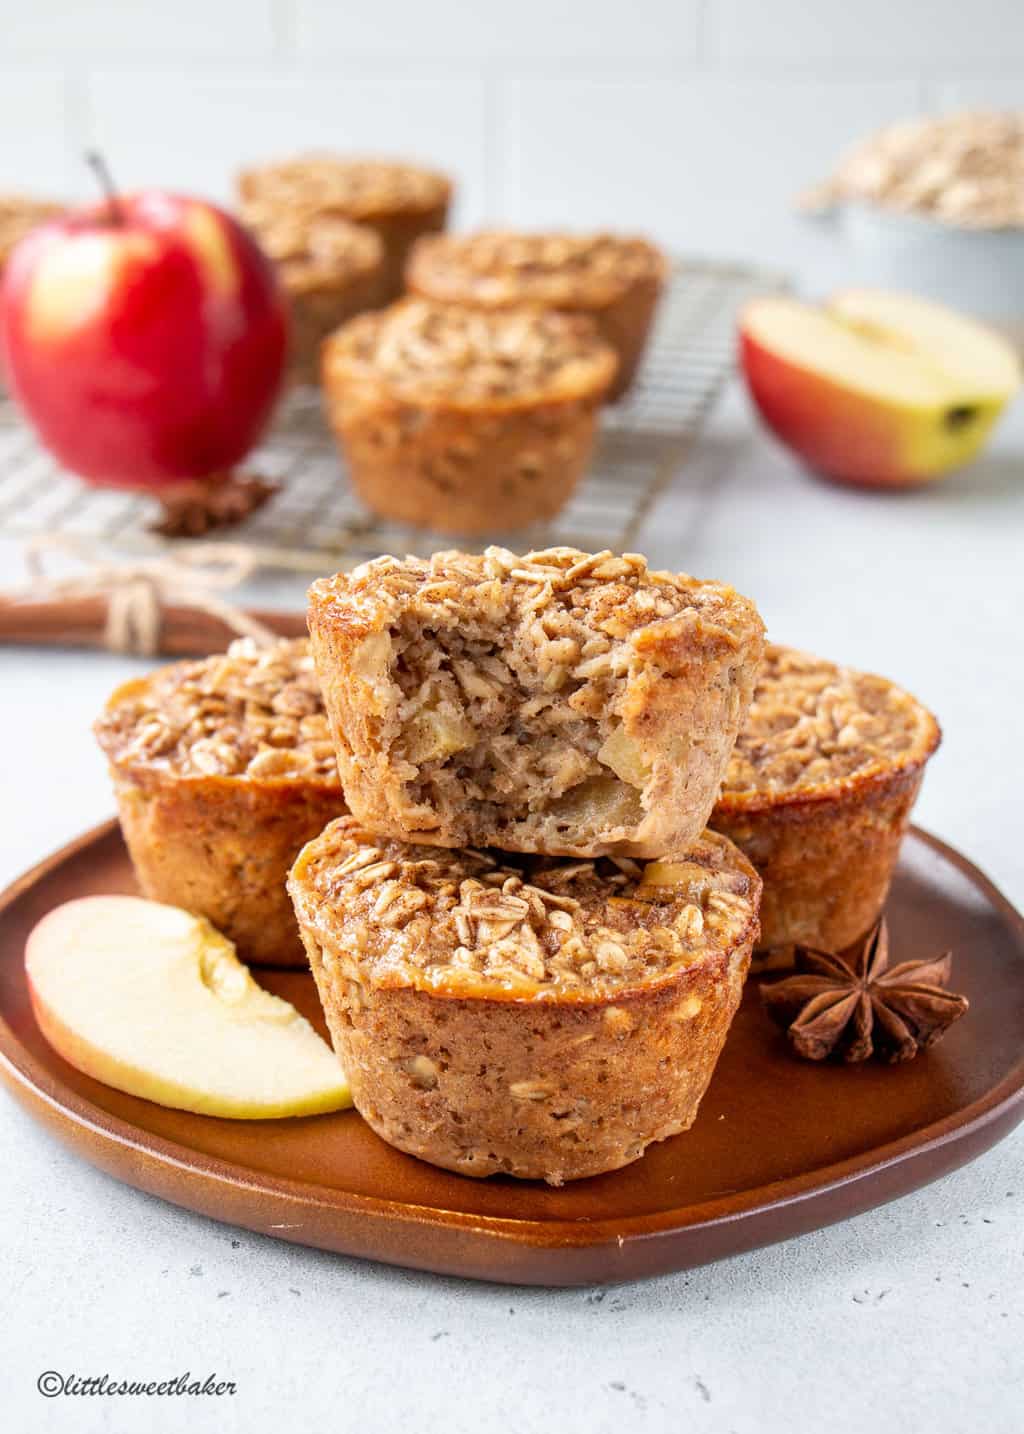 Baked apple oatmeal cups on a plate with a bite taken out of the top one